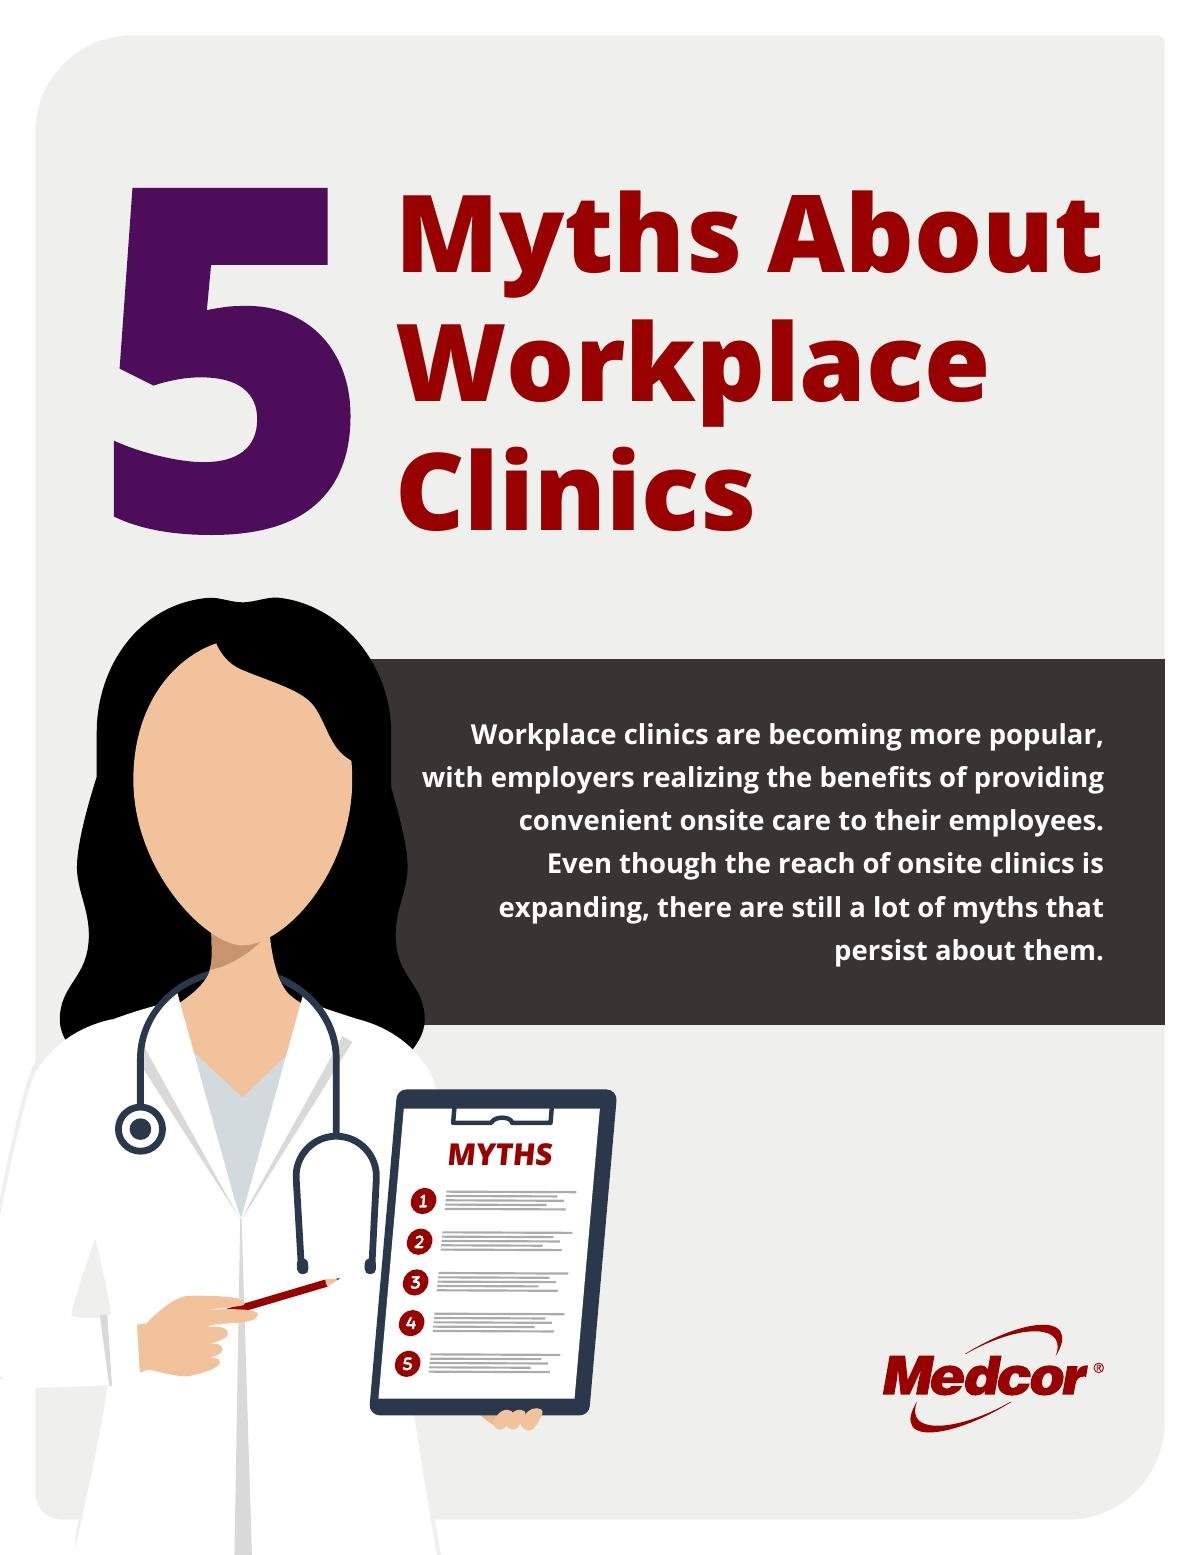 5 Myths About Workplace Clinics